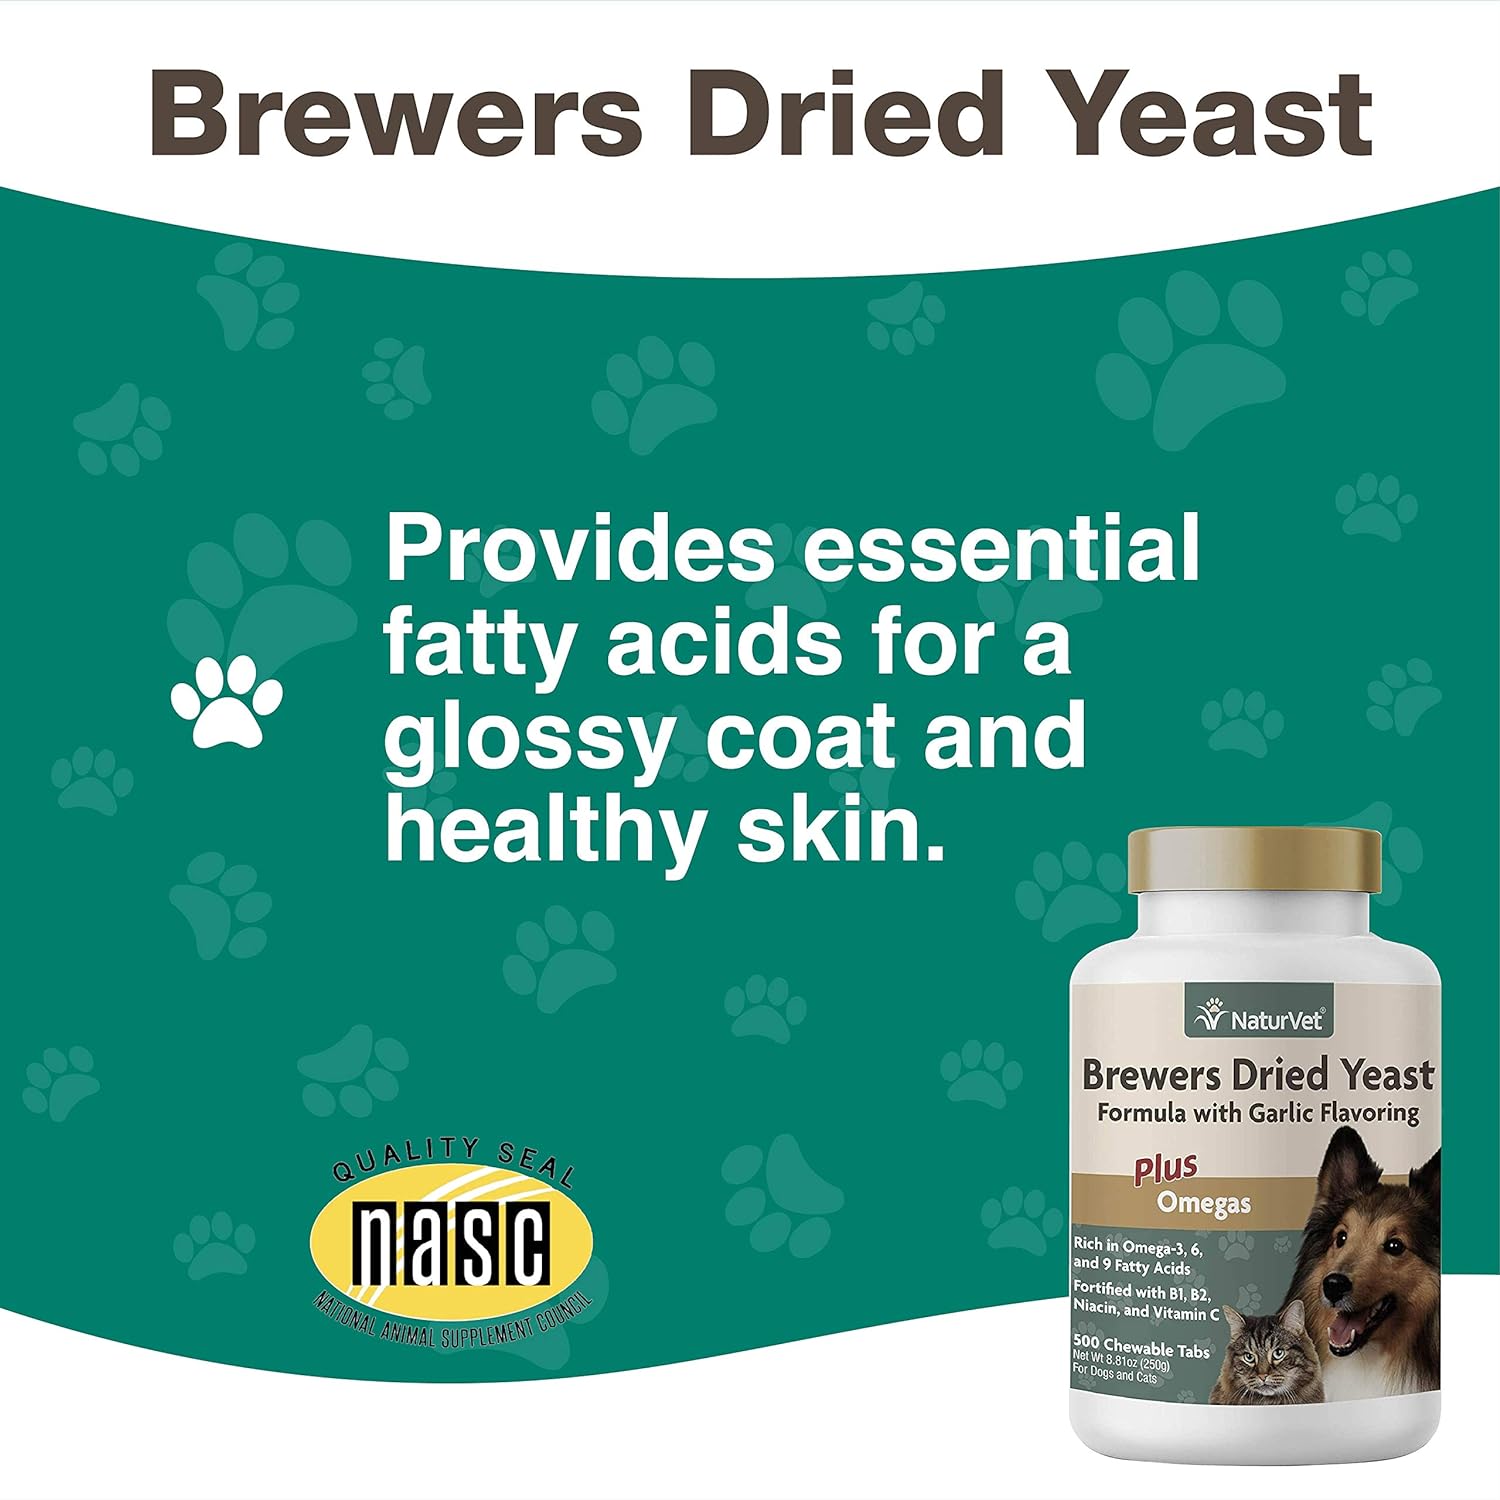 NaturVet Brewer’s Dried Yeast Pet Supplement with Garlic Flavoring – Includes B-Complex Vitamins, Omega-3, 6, & 9 Fatty Acids – Helps Support Glossy Coat, Healthy Skin for Dogs, Cats 500 Ct. : Pet Digestive Remedies : Pet Supplies